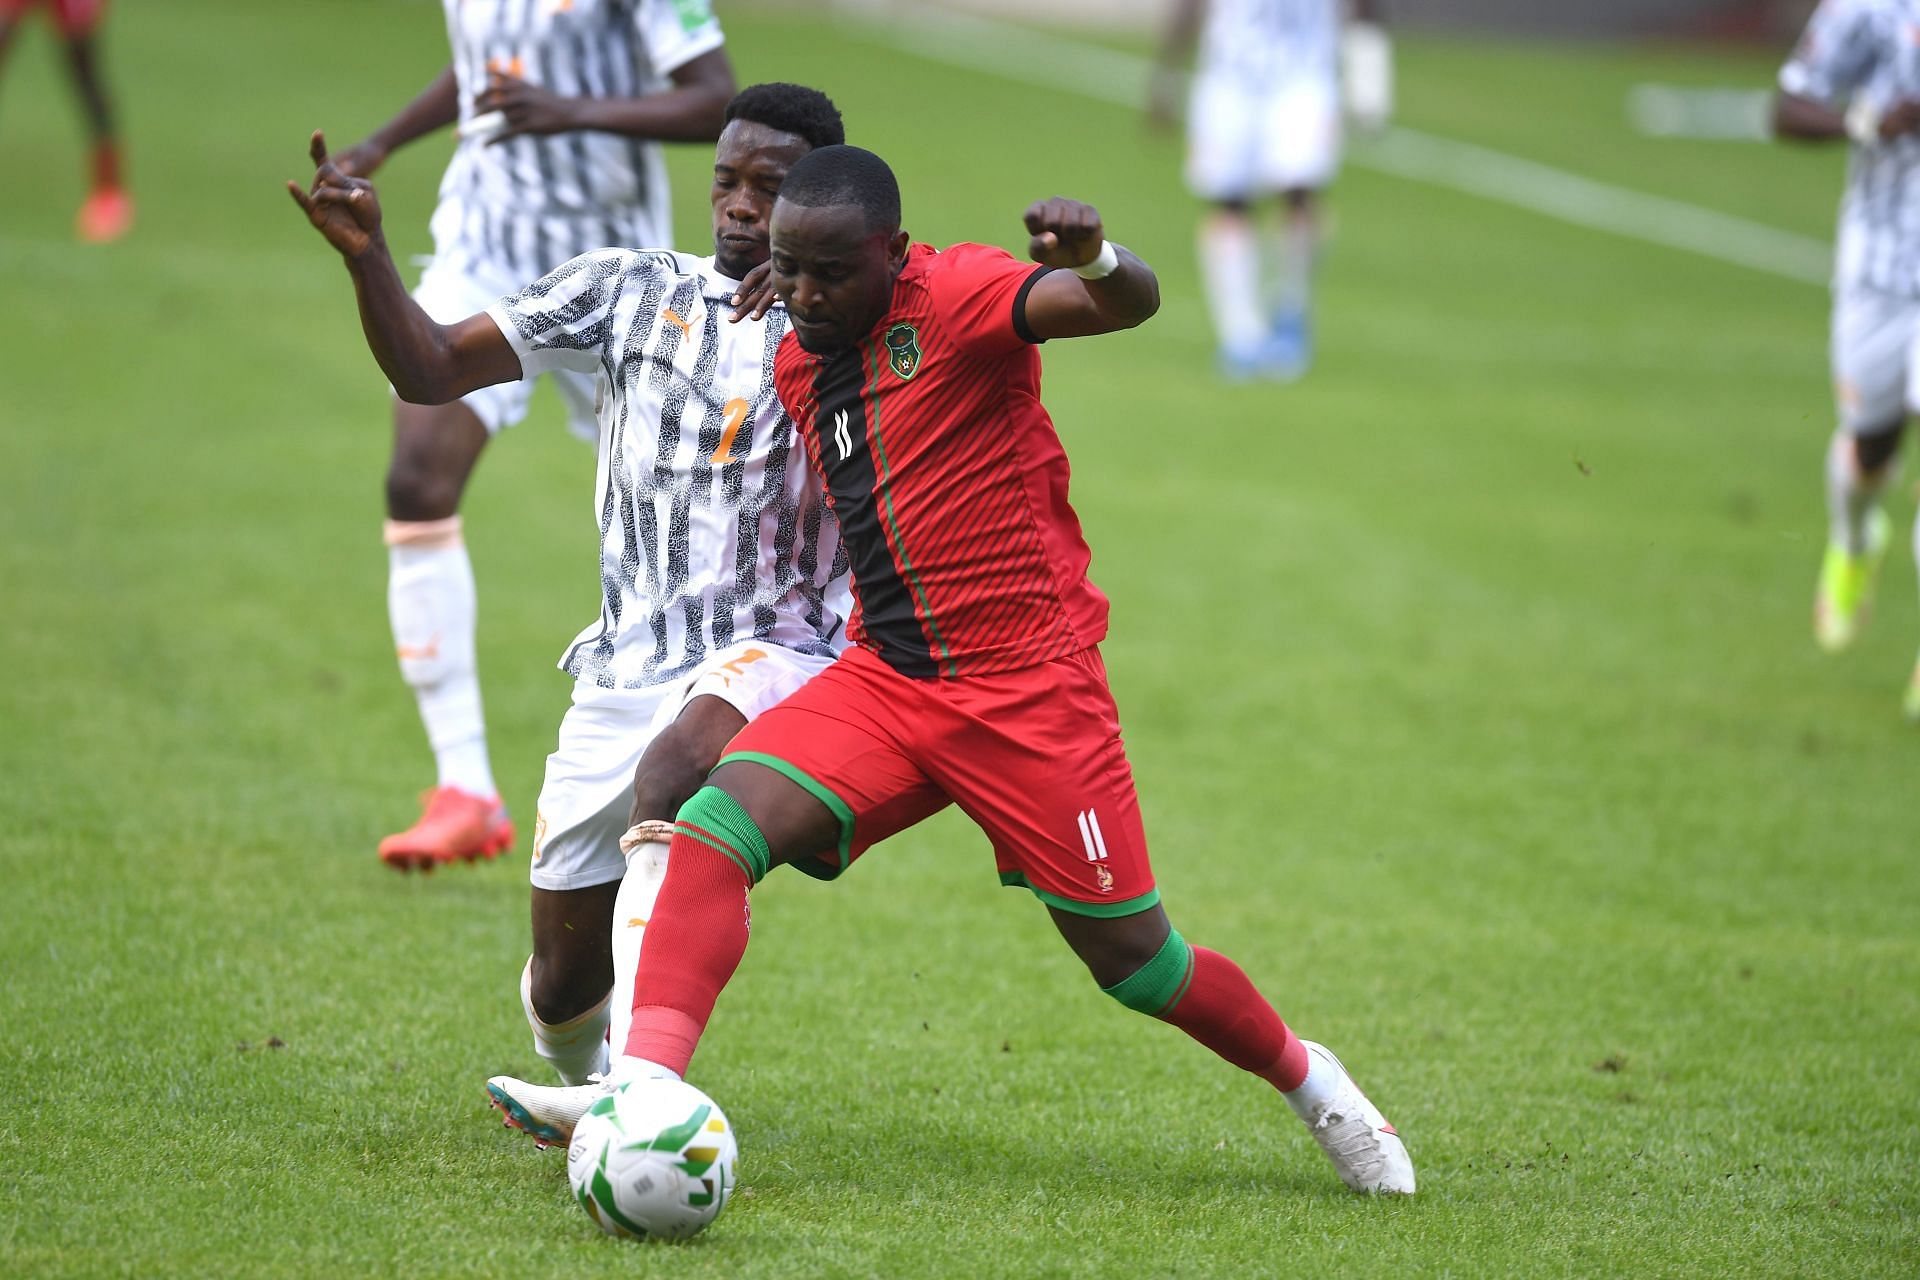 Malawi take on Ethiopia in their 2023 AFCON qualifying fixture on Sunday